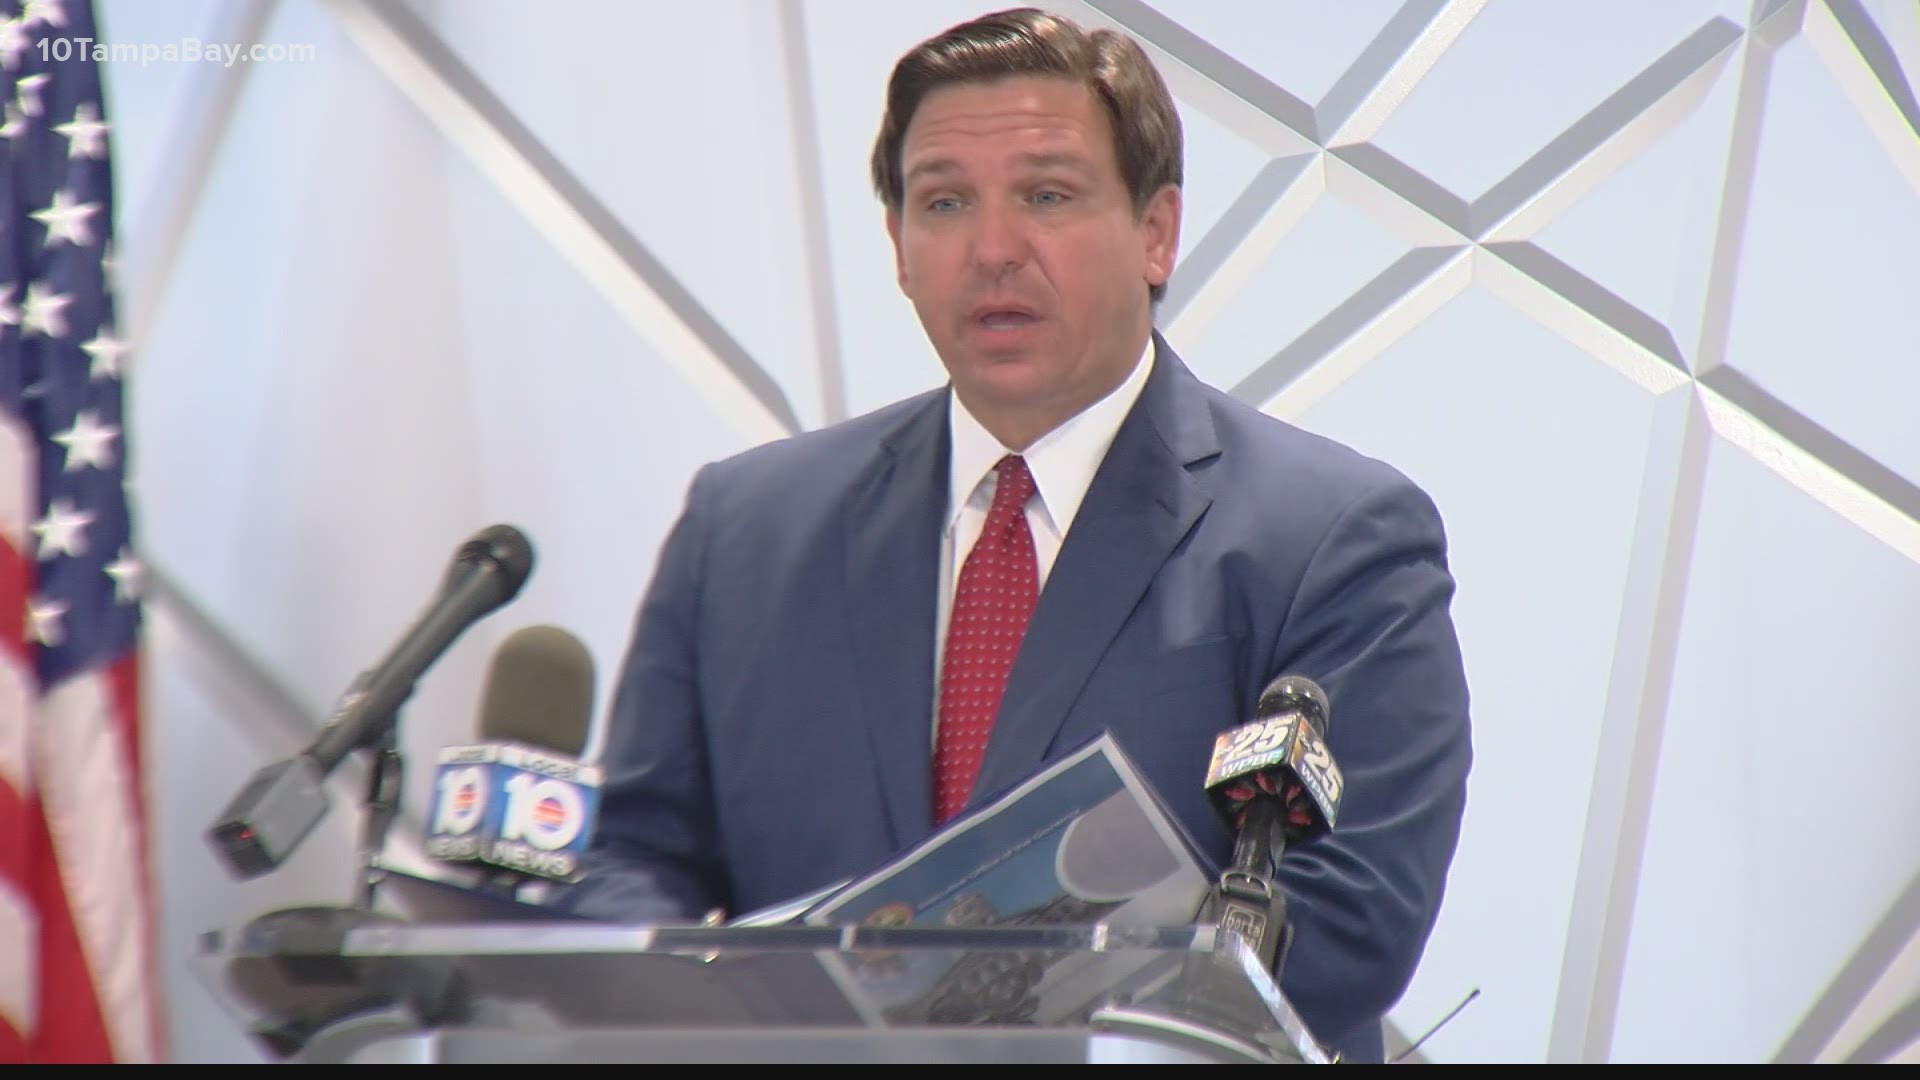 The commissioner of Agriculture and Consumer Services is urging Governor DeSantis to mobilize the state National Guard to better distribute COVID-19 vaccines.